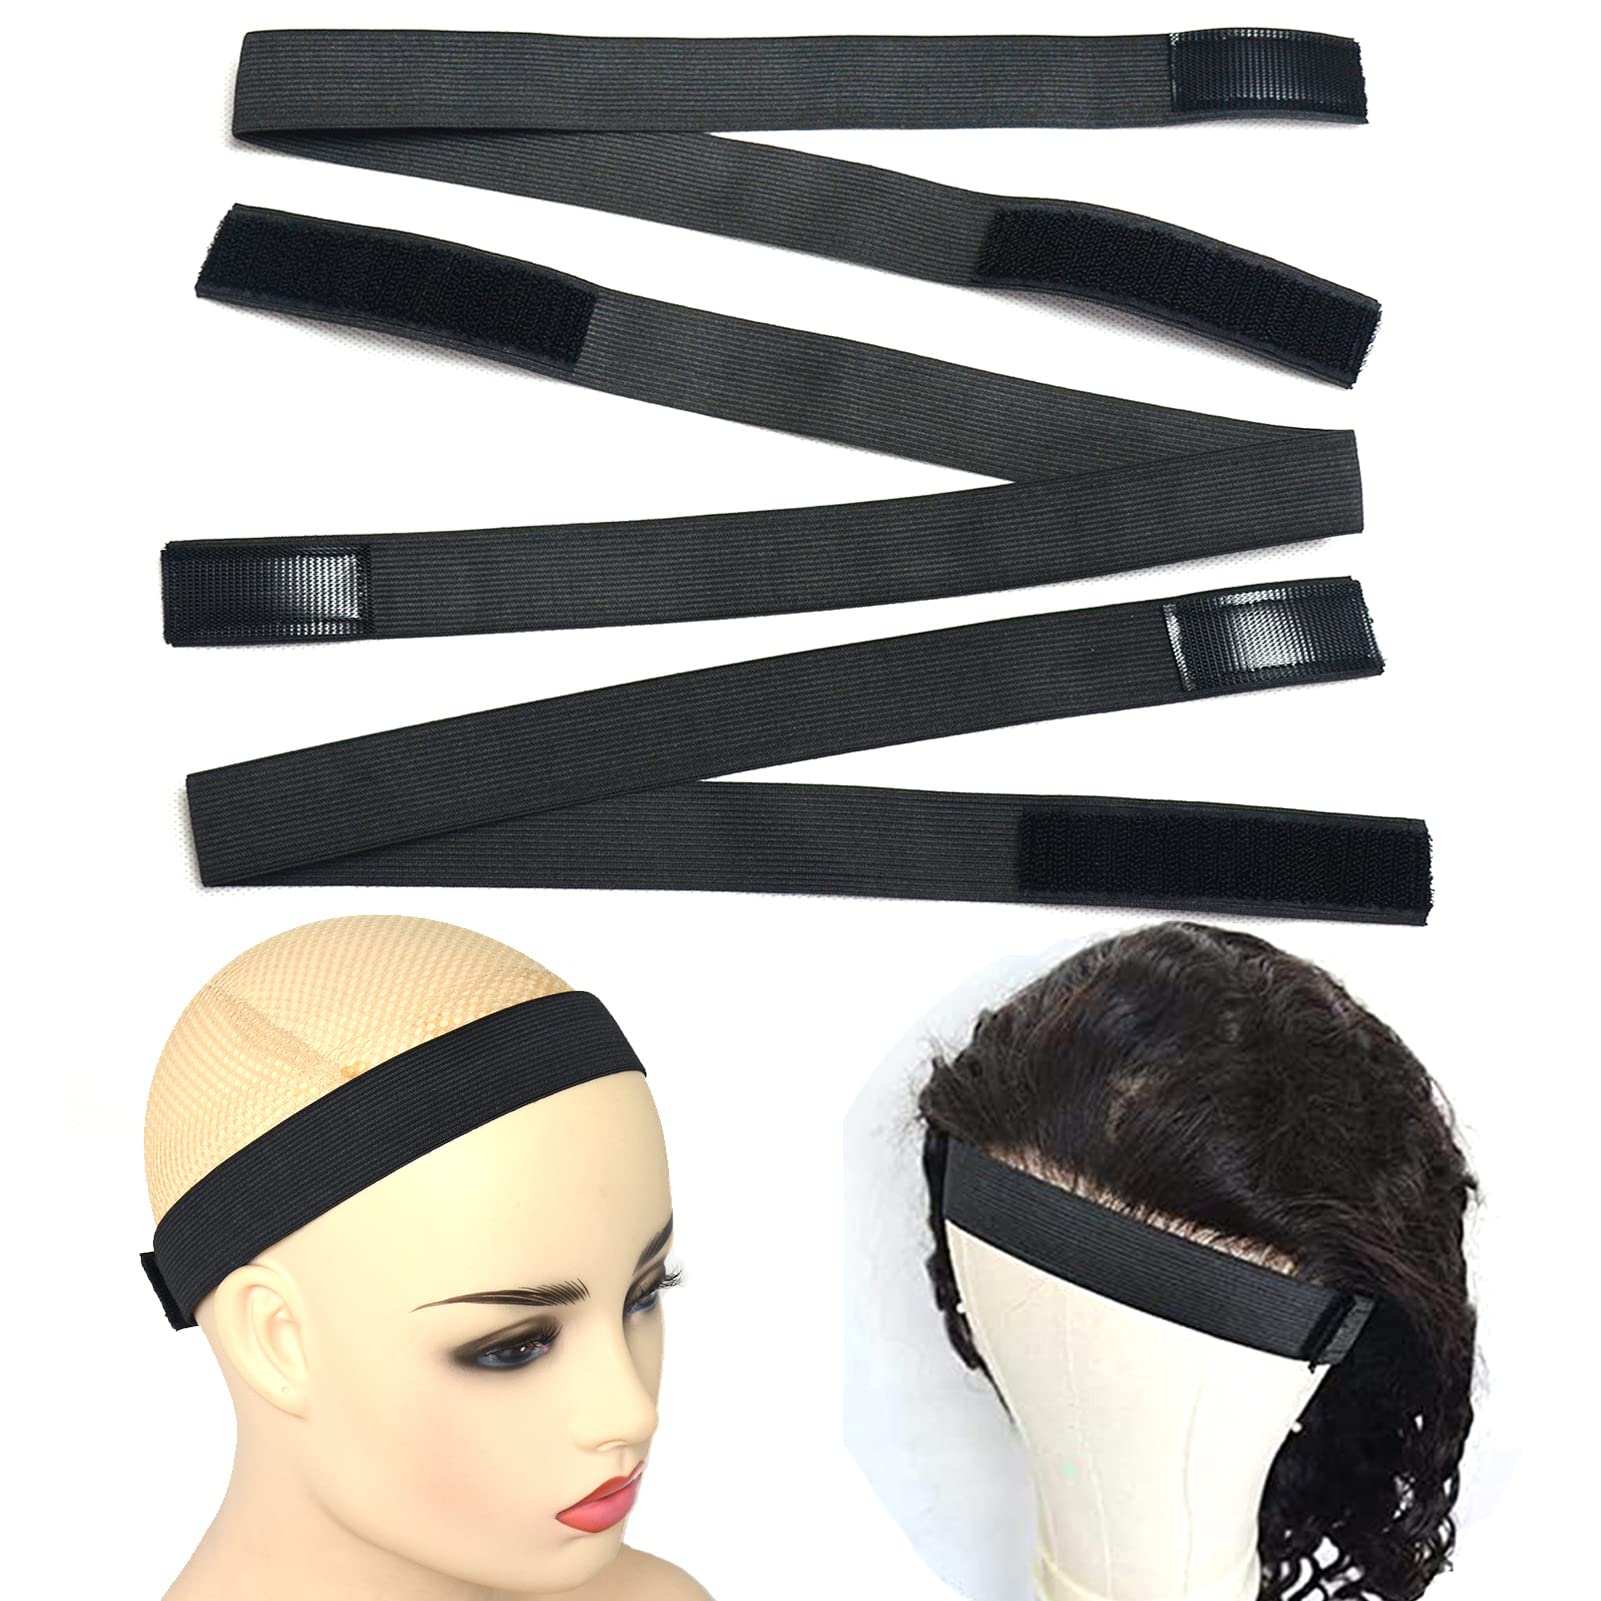 BLUPLE 3 PCS Adjustable Elastic Band for Wigs Edges Lace Melting Bands Edge  laying Bands Elastic Wig Bands with Velcr Thick Comfortable Durable (3 PCS  Black) 3 PCS Black